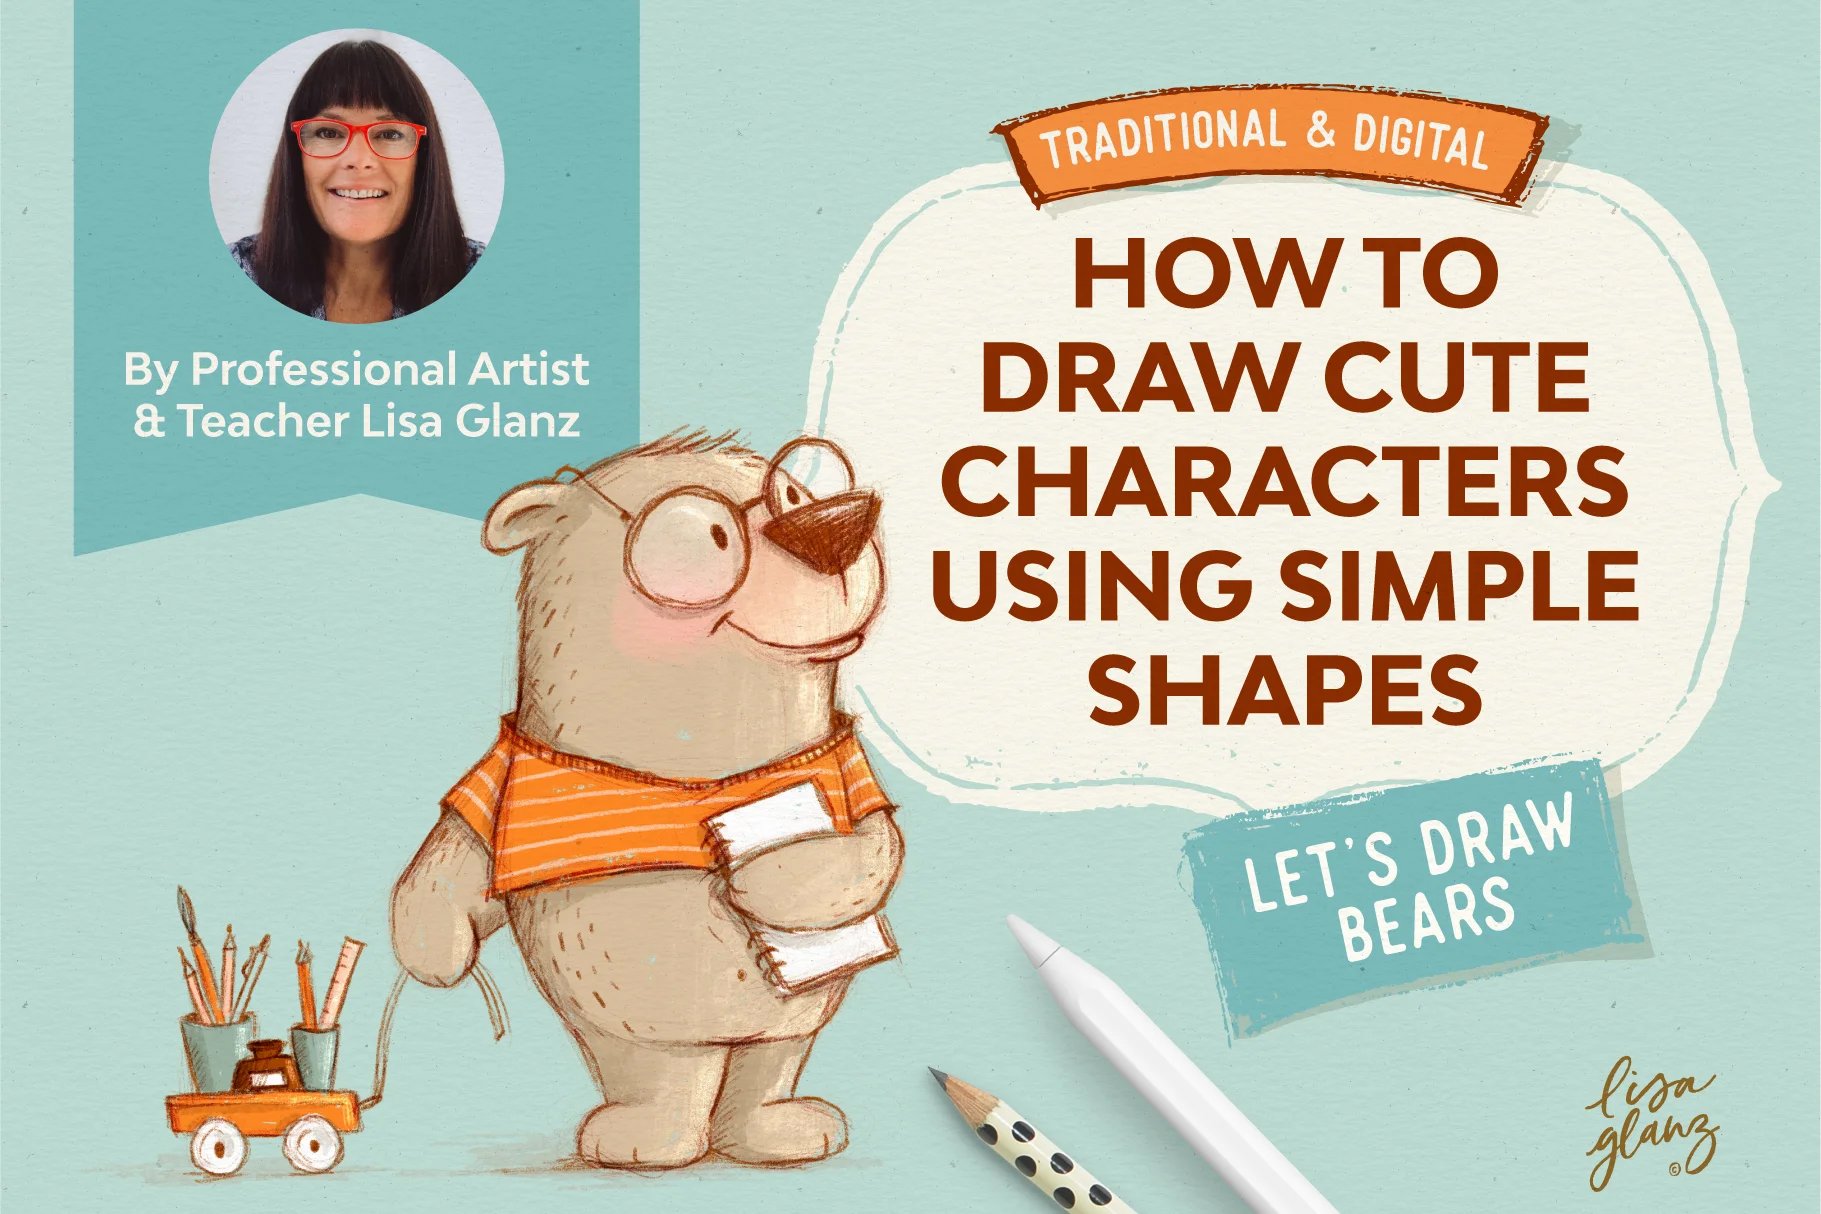 How to Draw Cute Characters With Simple Shapes: Let's Draw Bears